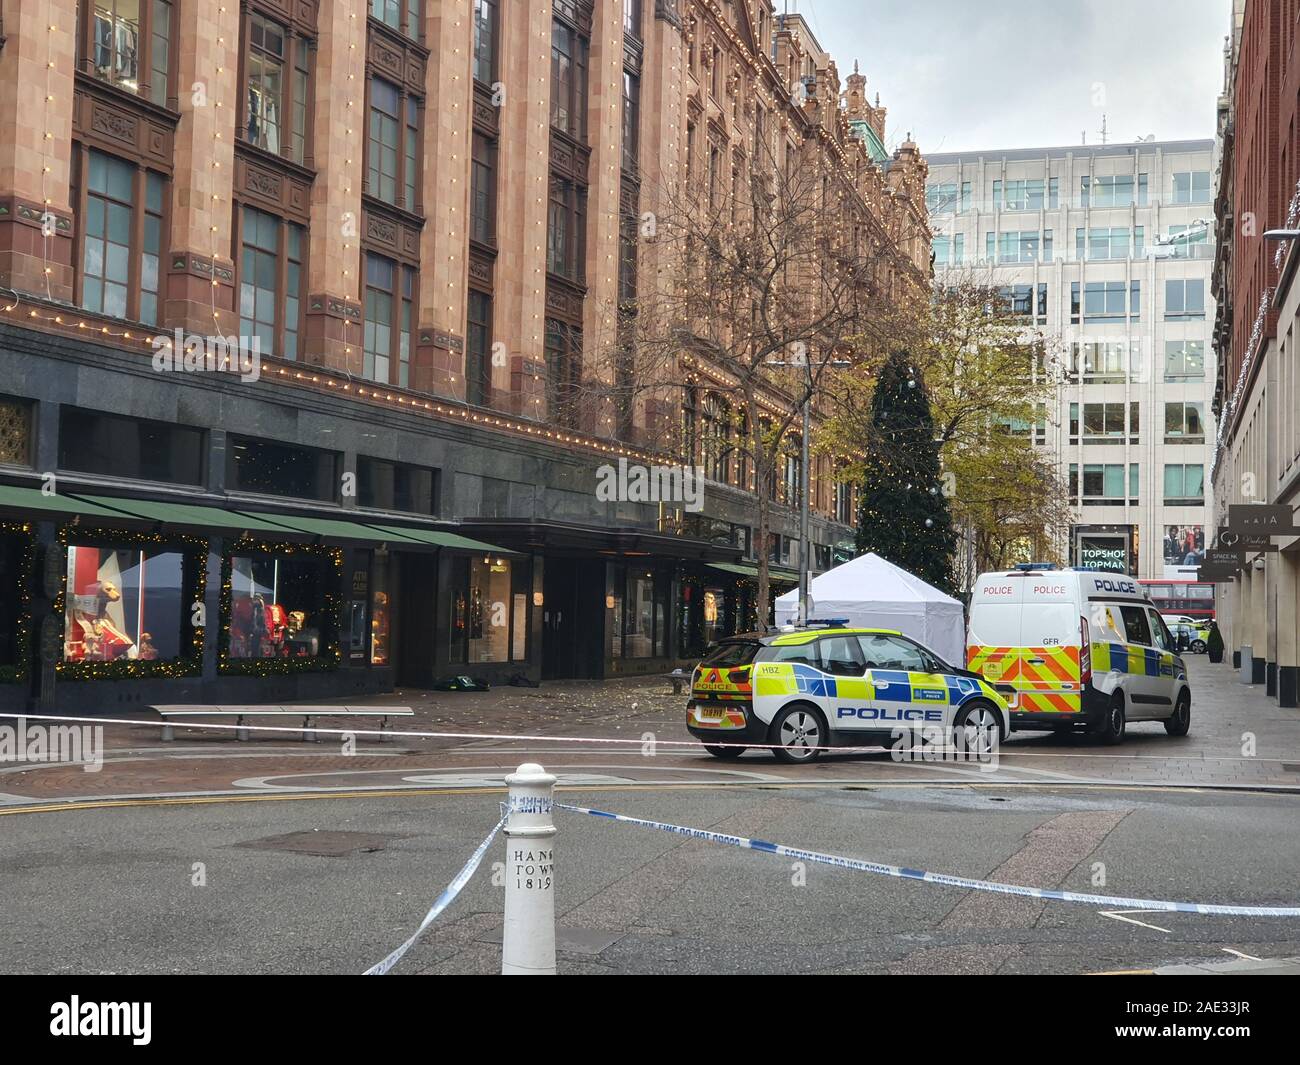 The scene in Knightsbridge, where a murder investigation has begun after a man was knifed to death near Harrods department store in a suspected robbery, as he made his way home from a nearby restaurant. Stock Photo